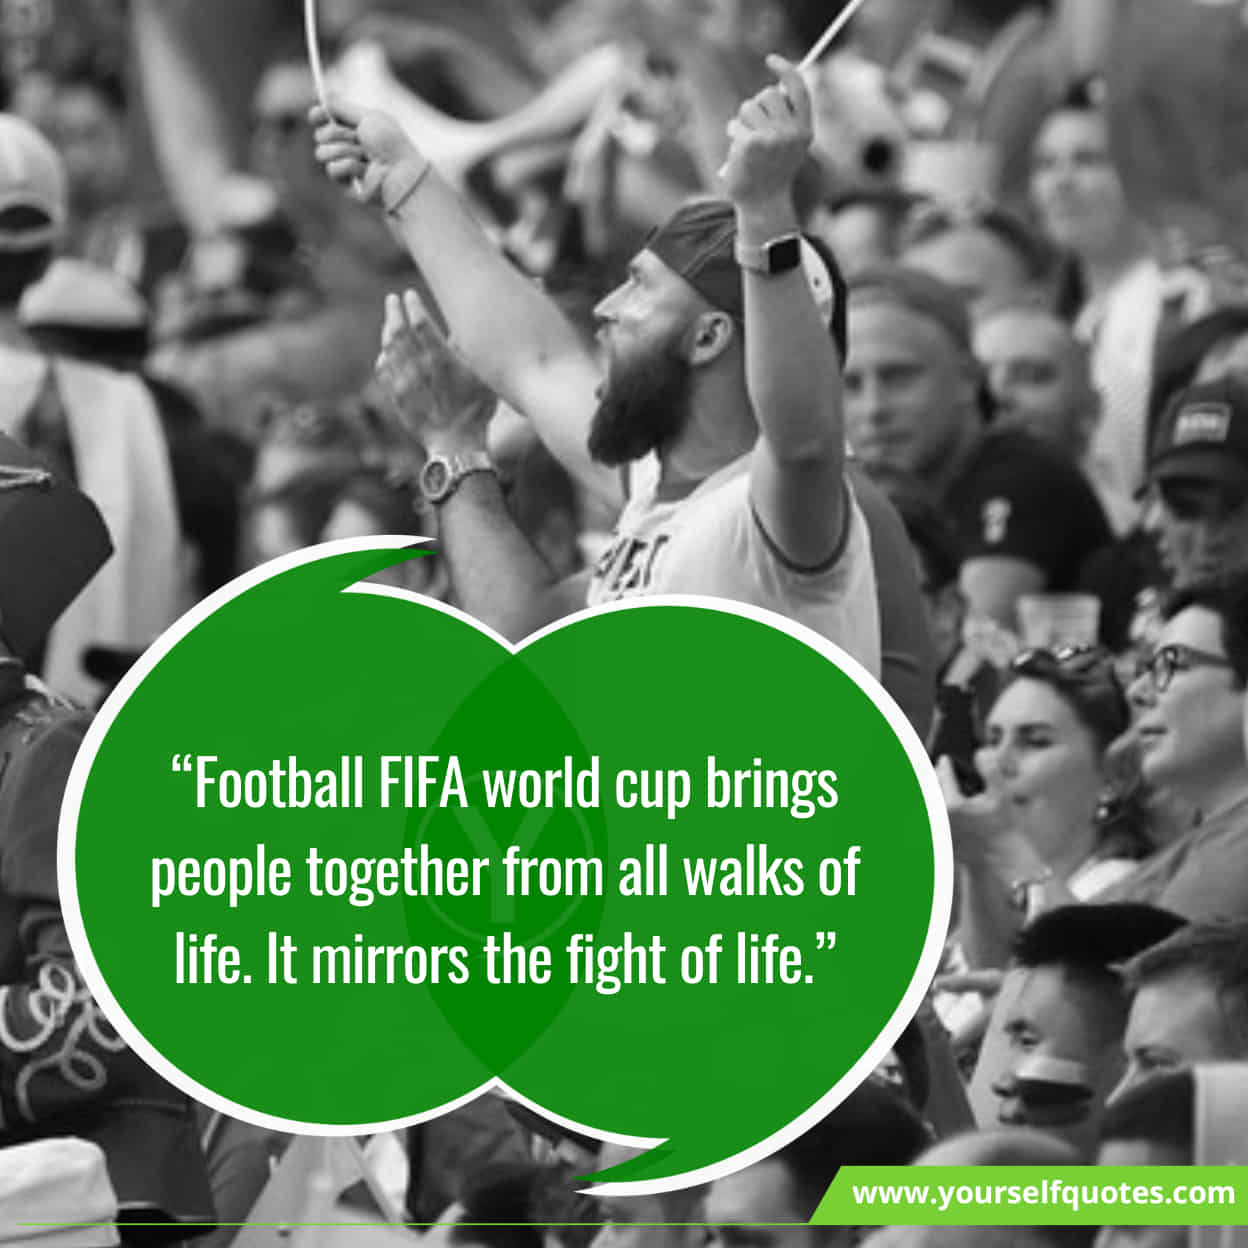 FIFA World Cup Quotes From Famous Athletes